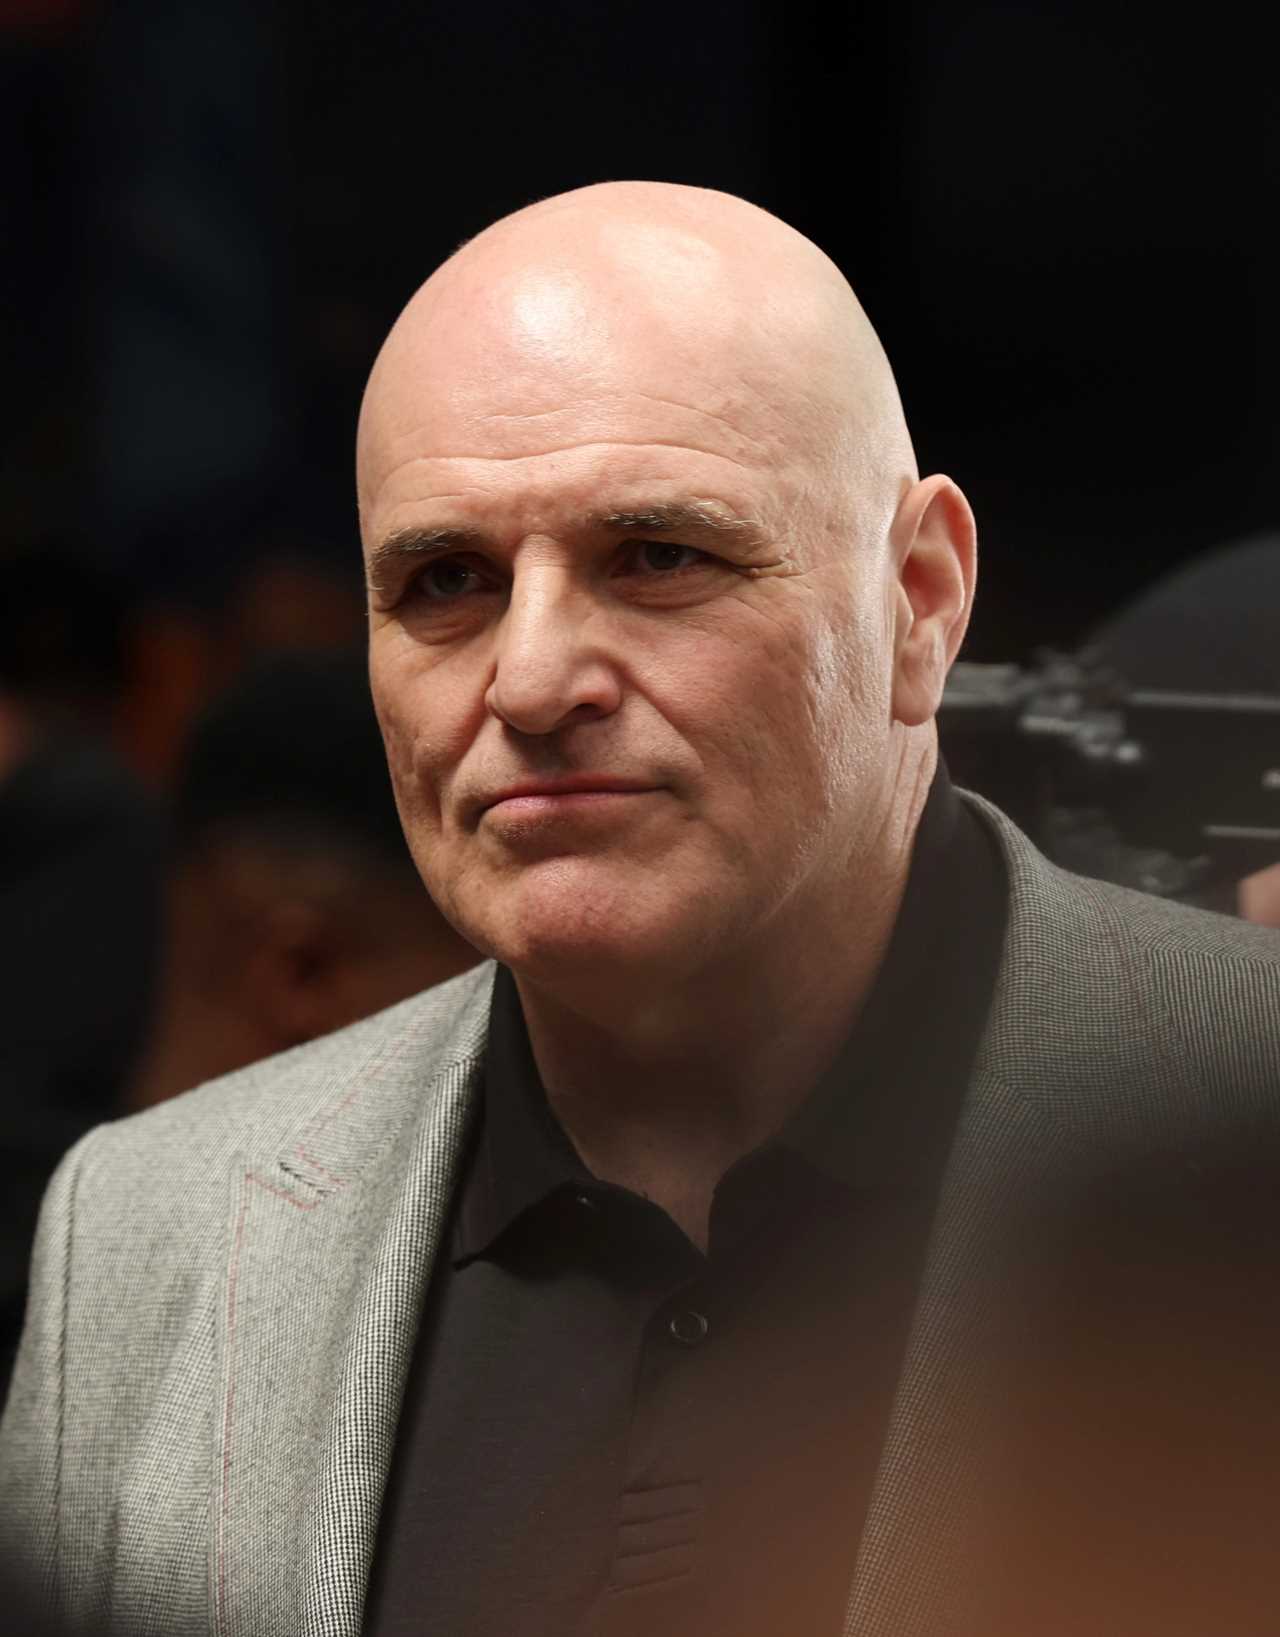 John Fury claims that Anthony Joshua is better than what's been shown and he will support Brit against Usyk